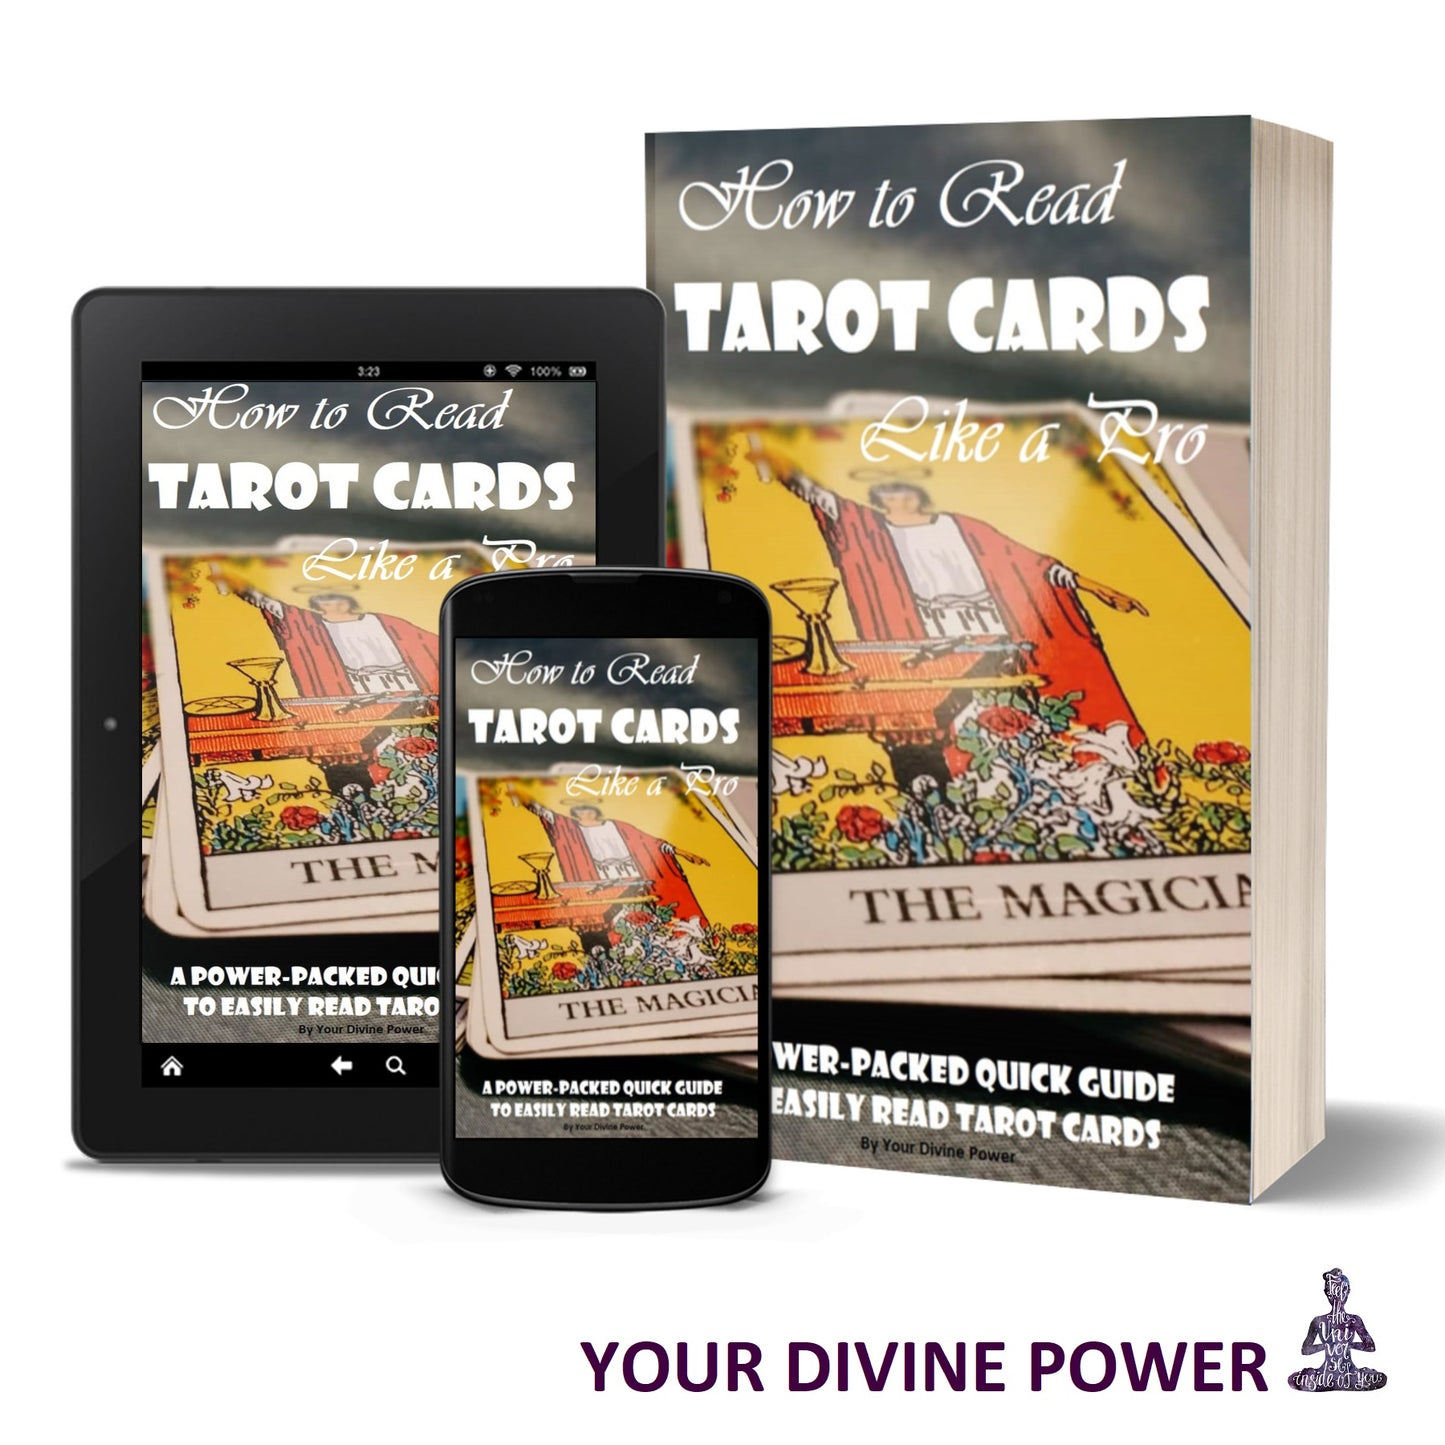 How to Read TAROT Cards - Like a Pro!